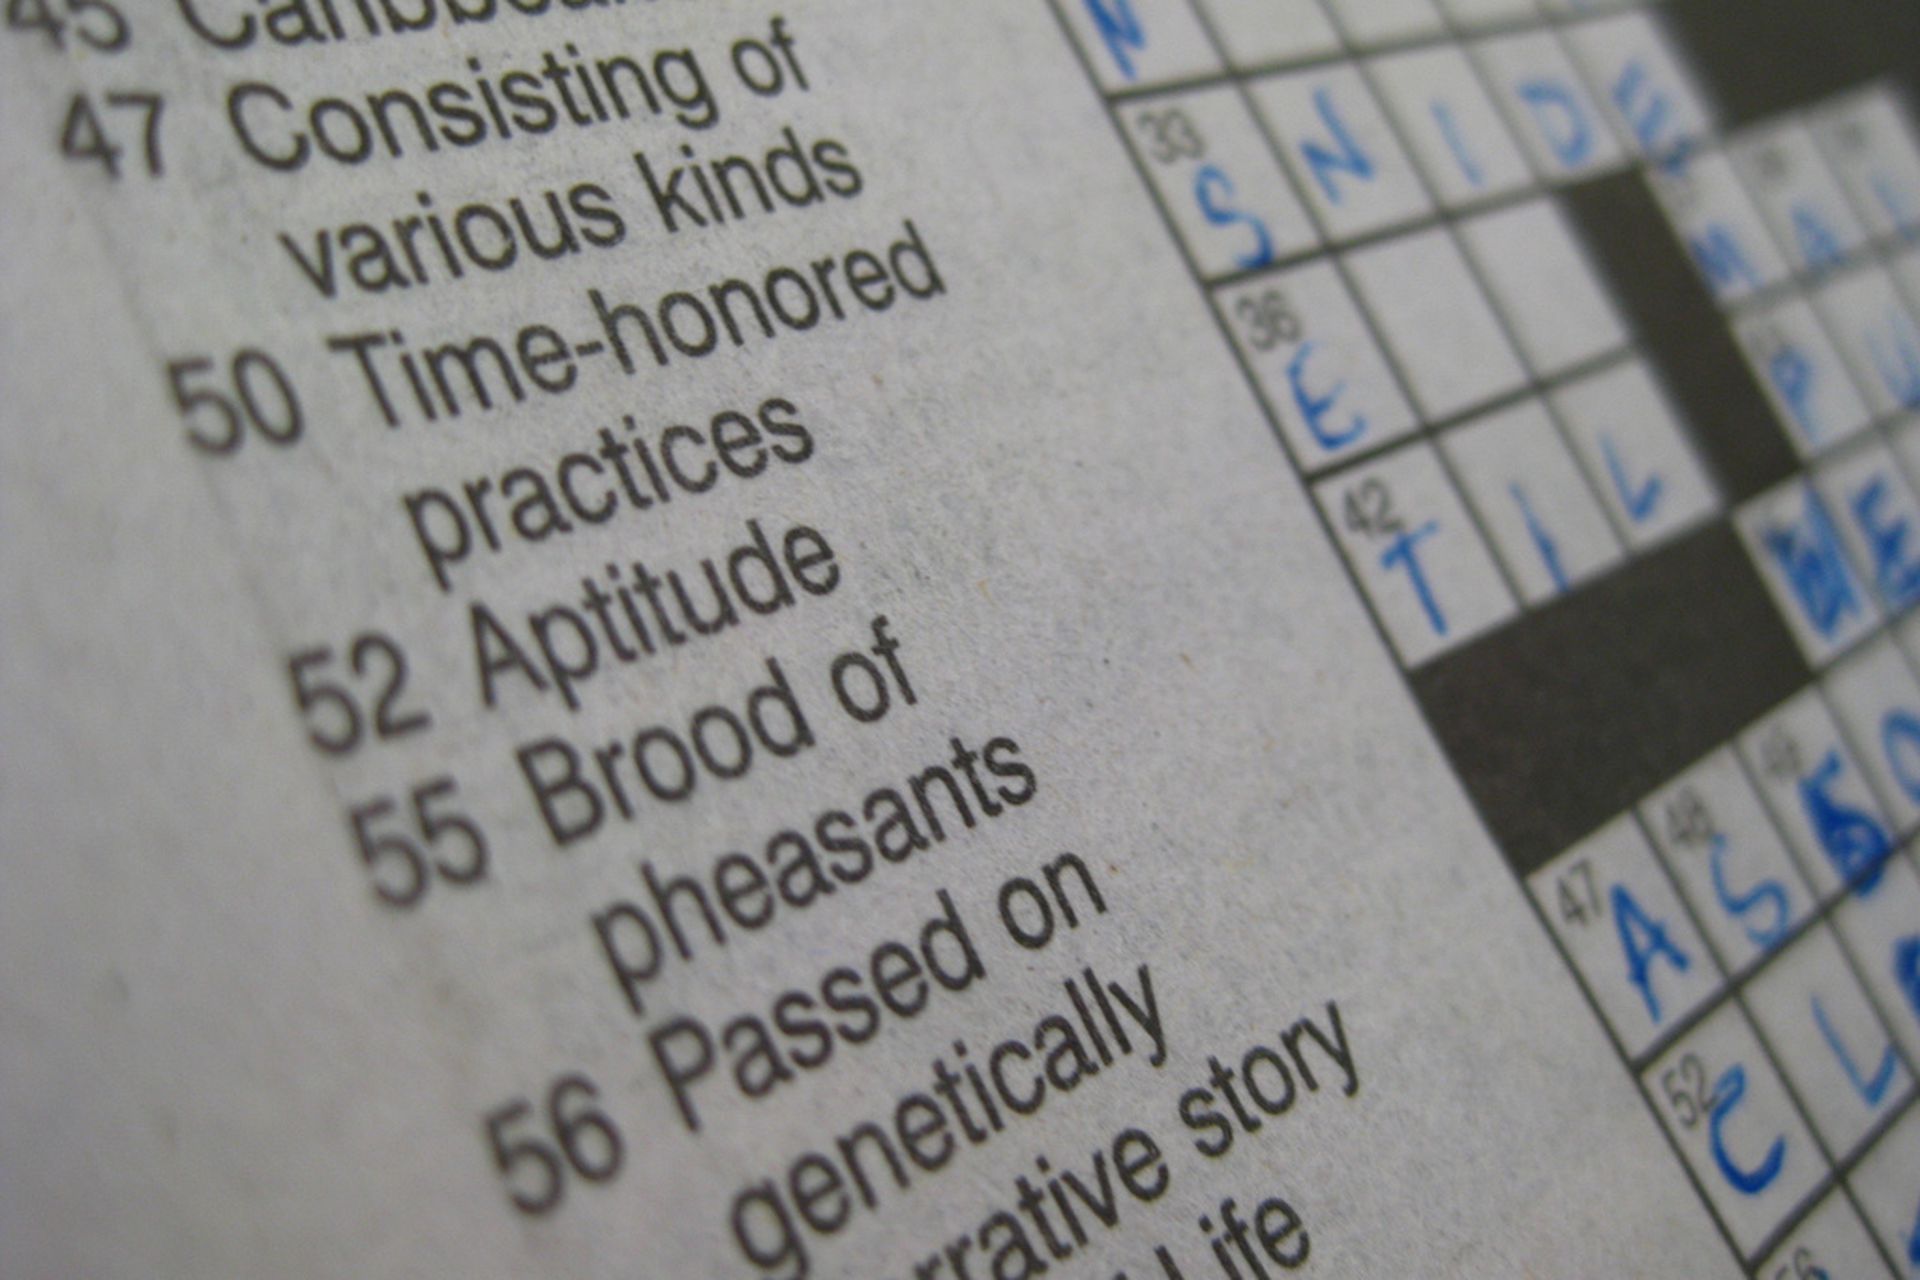 Collaborative NYT crosswords return to Twitch over Thanksgiving weekend